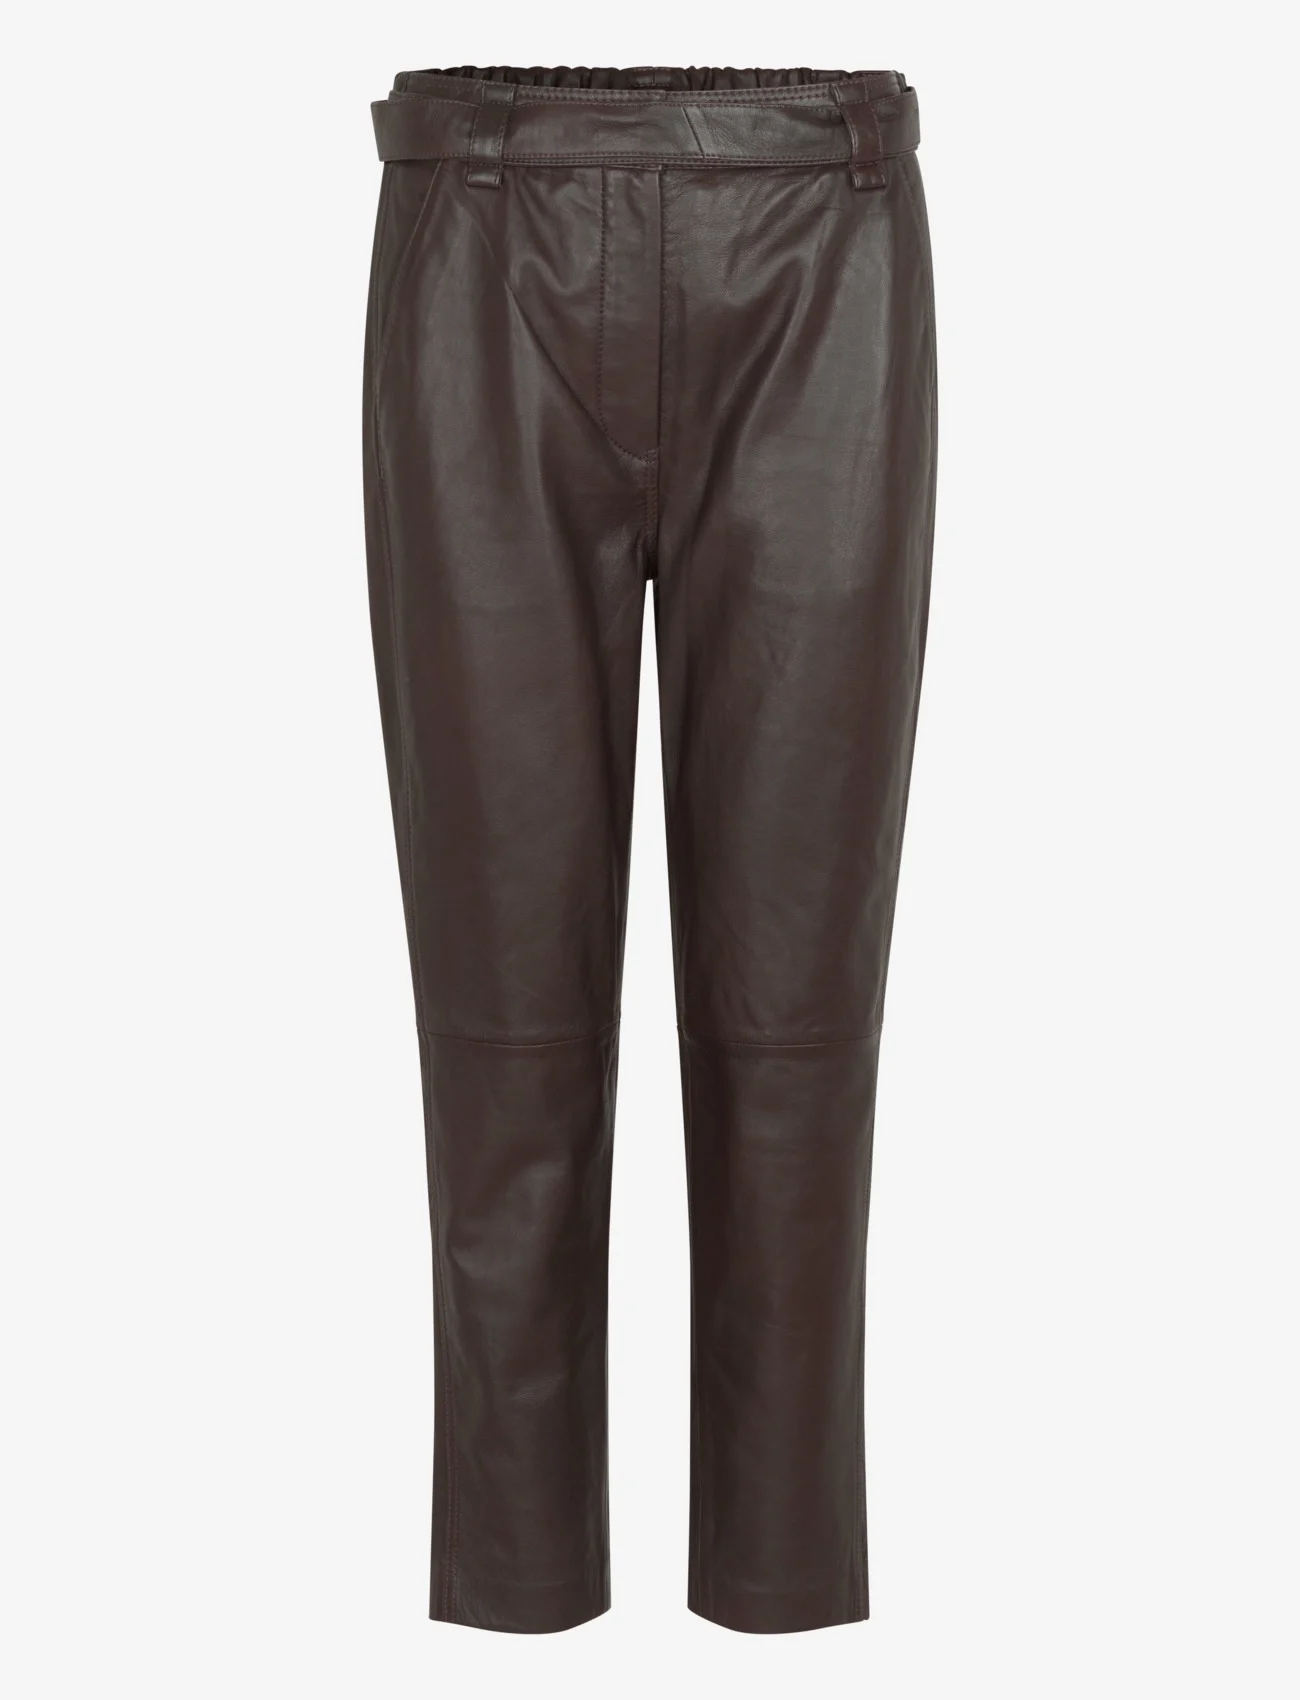 Second Female - Indie Leather New Trousers - festmode zu outlet-preisen - delicioso - 0